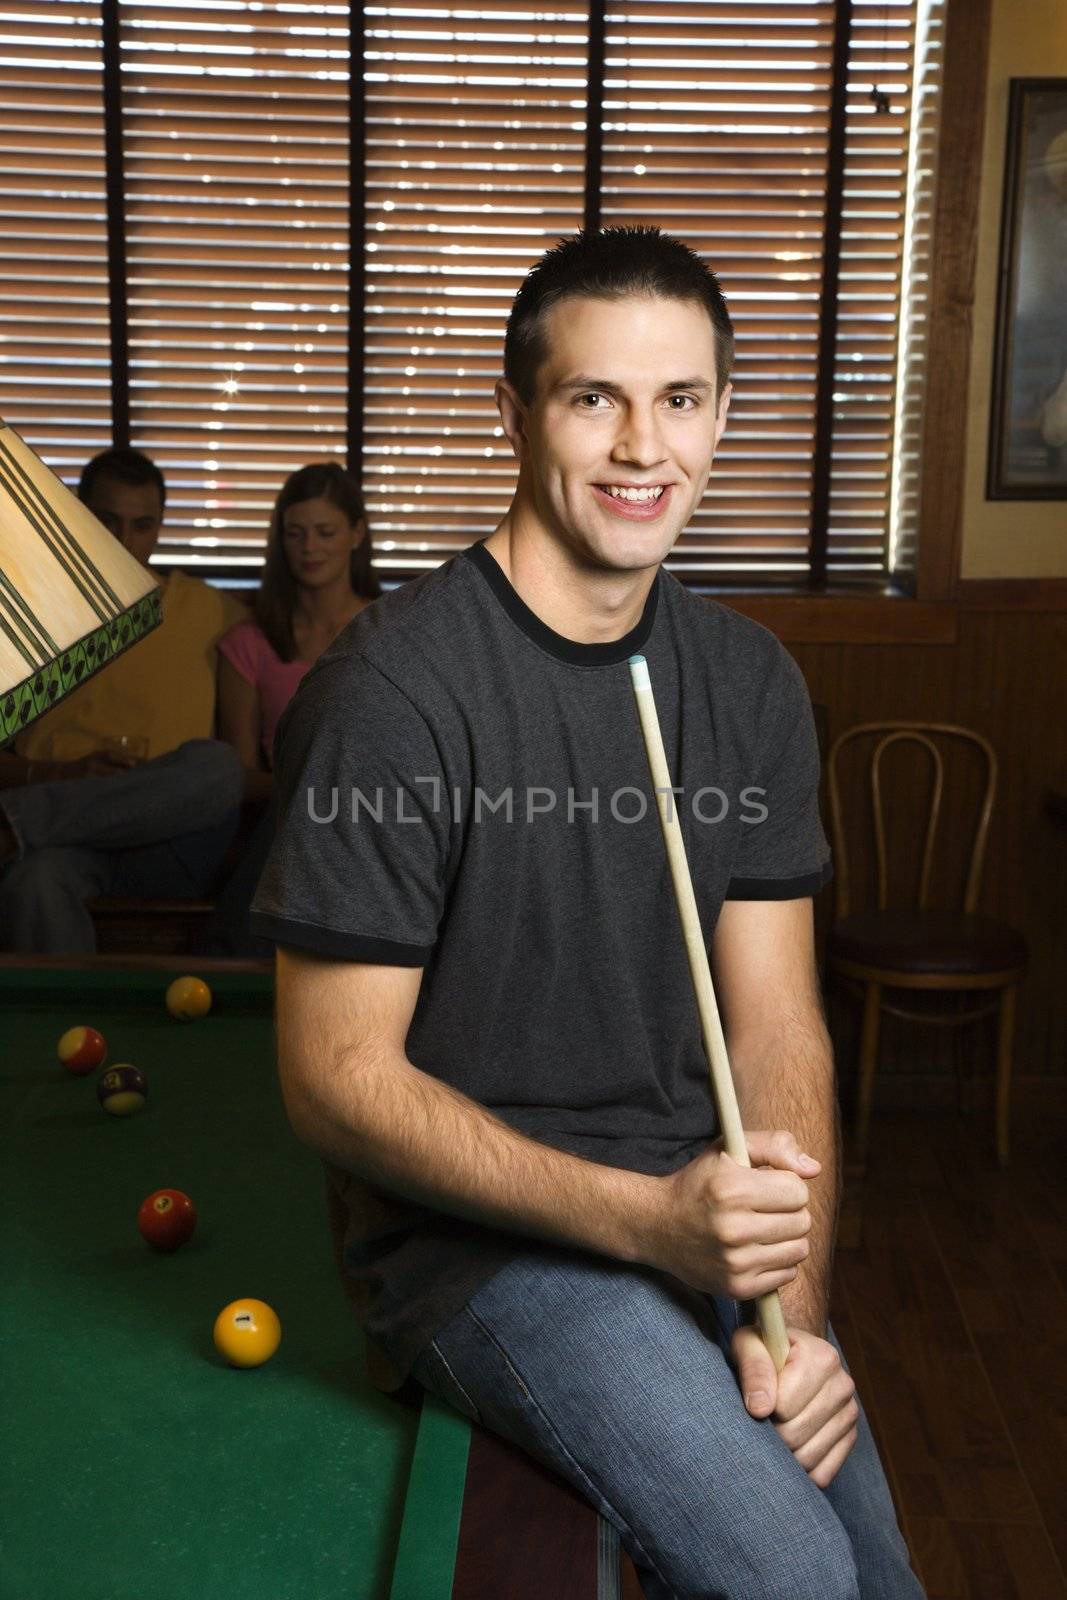 Portrait of young man leaning on billiards table holding pool stick.